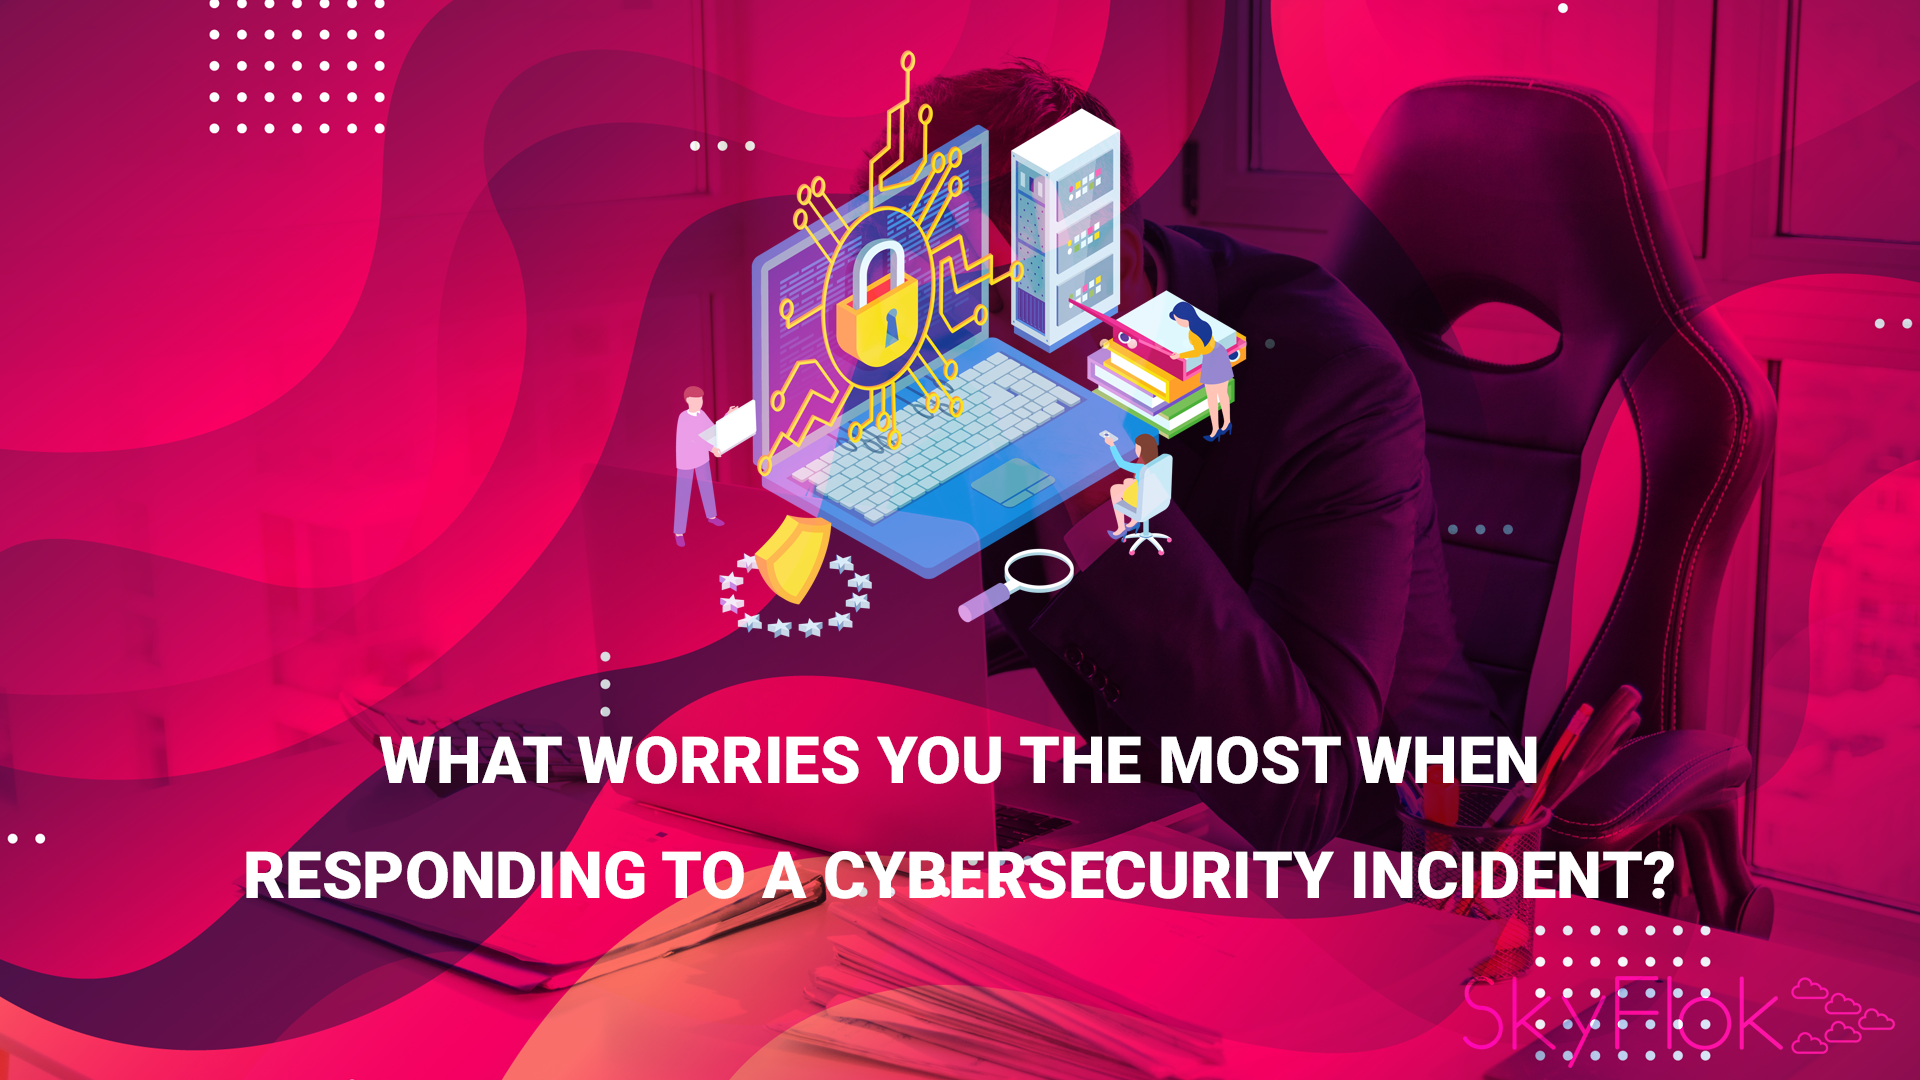 What worries you the most when responding to a cybersecurity incident?